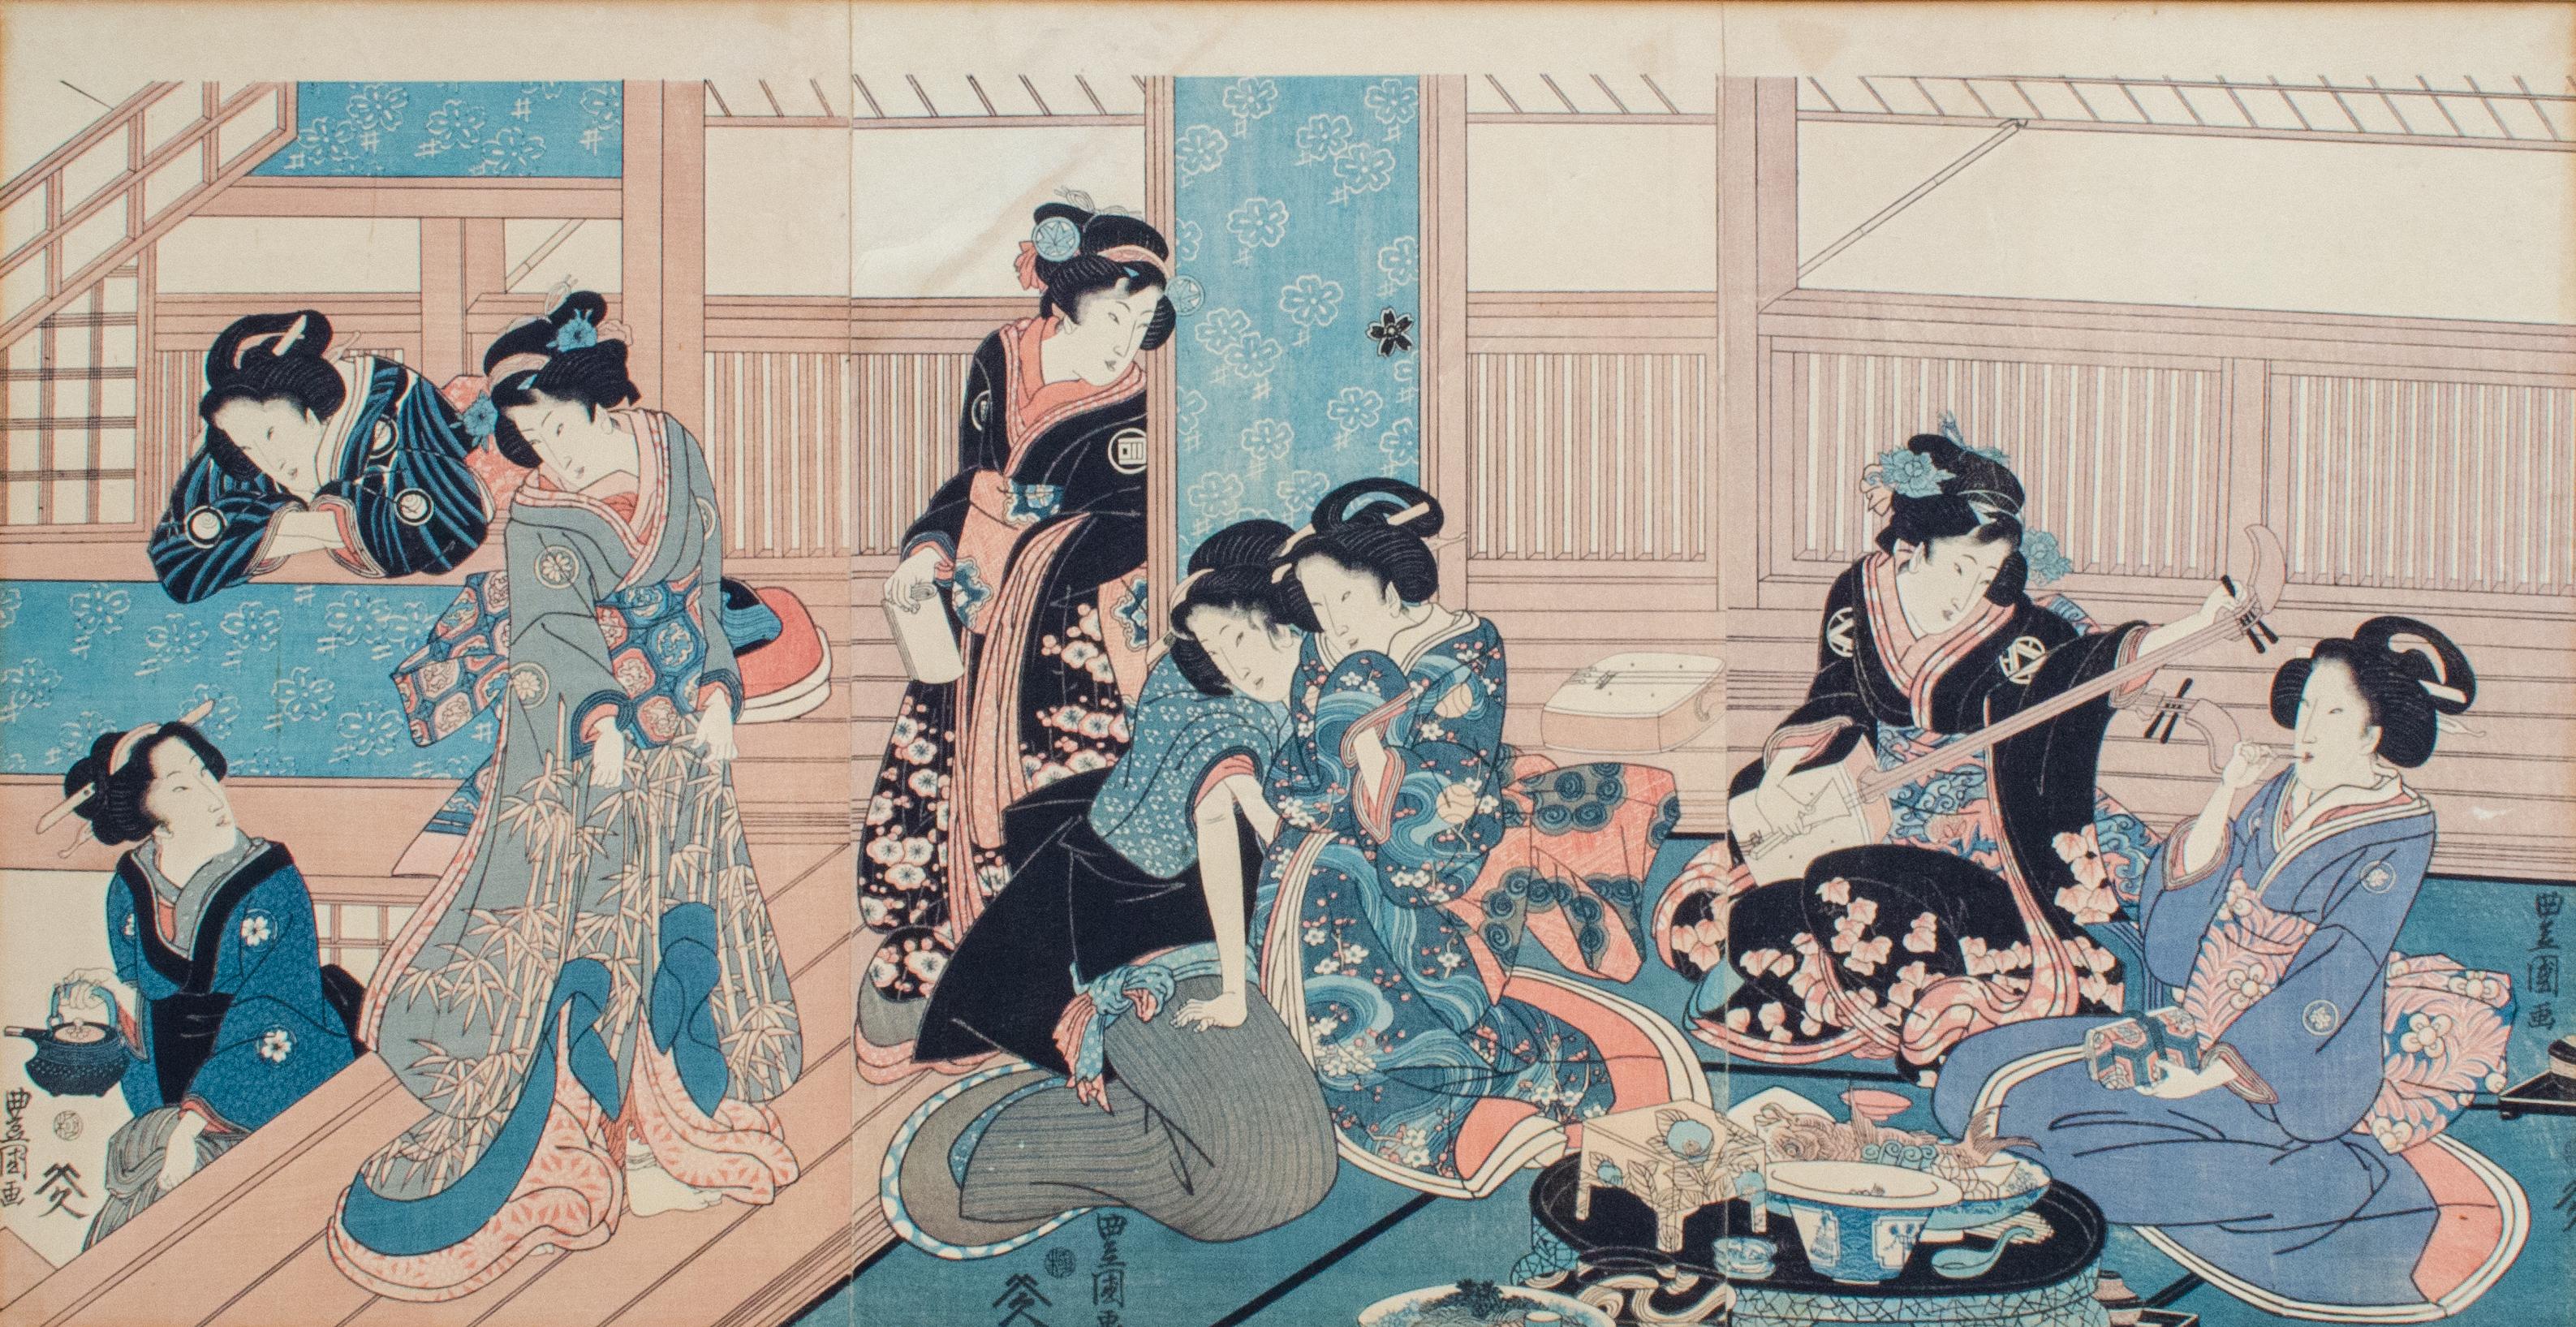 Ukiyo-e Style Japanese Woodcut of Courtesans in Their Quarters - Print by Unknown